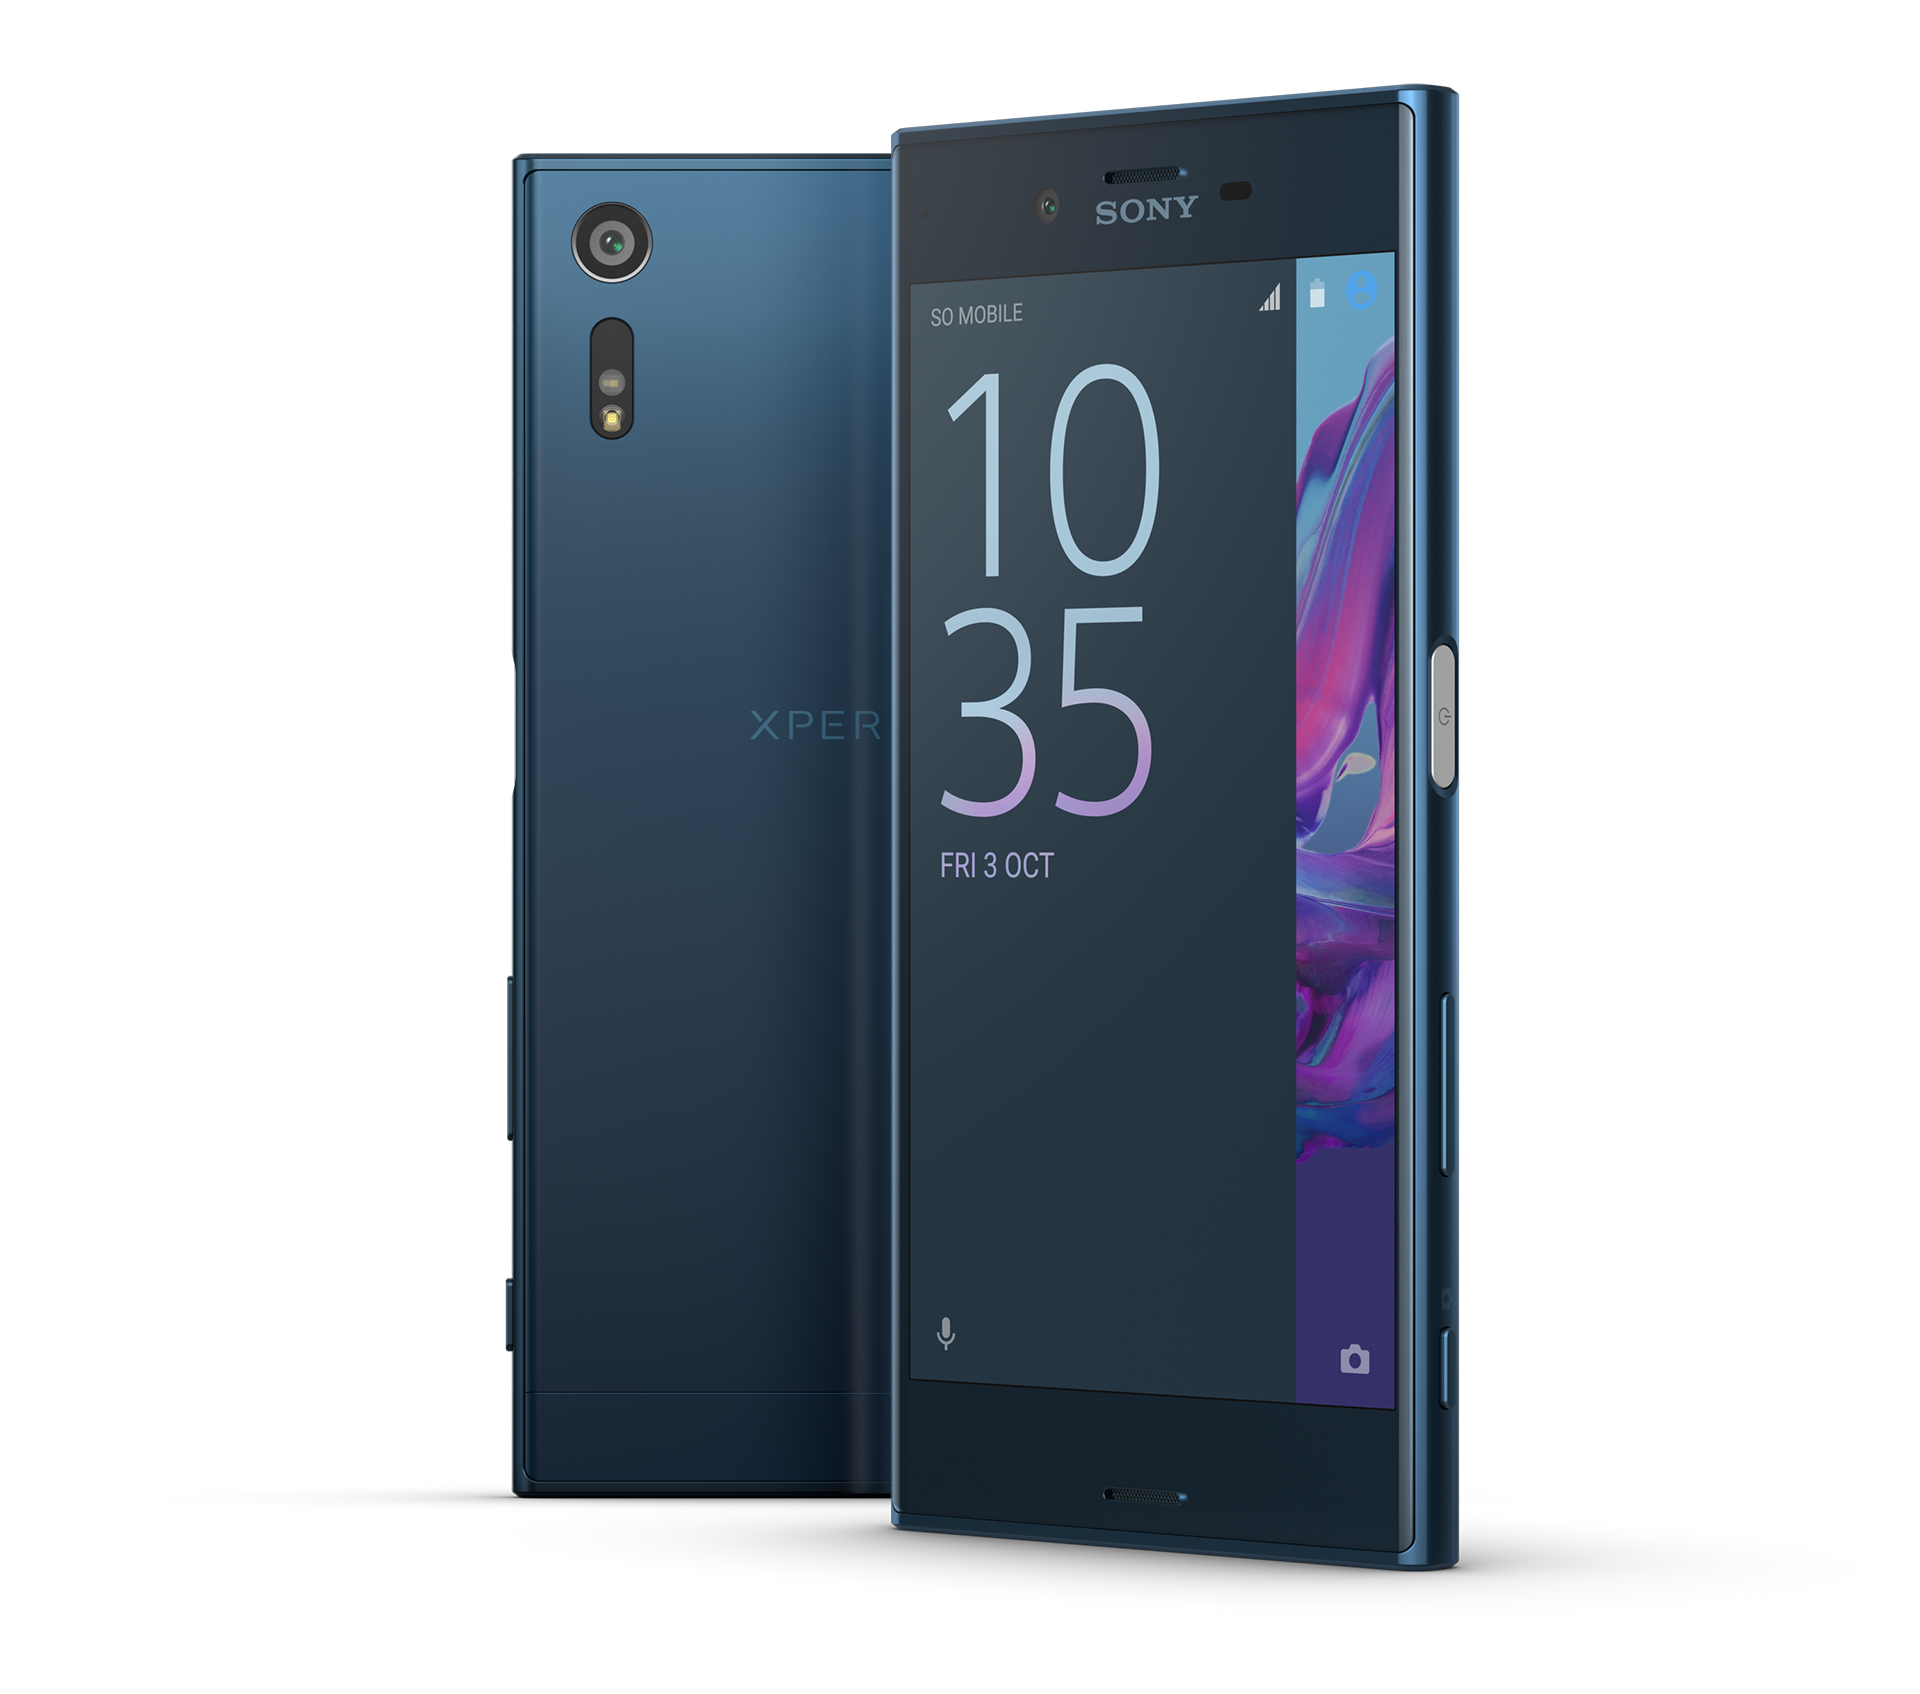 Sony Xperia XZ is now available in the US